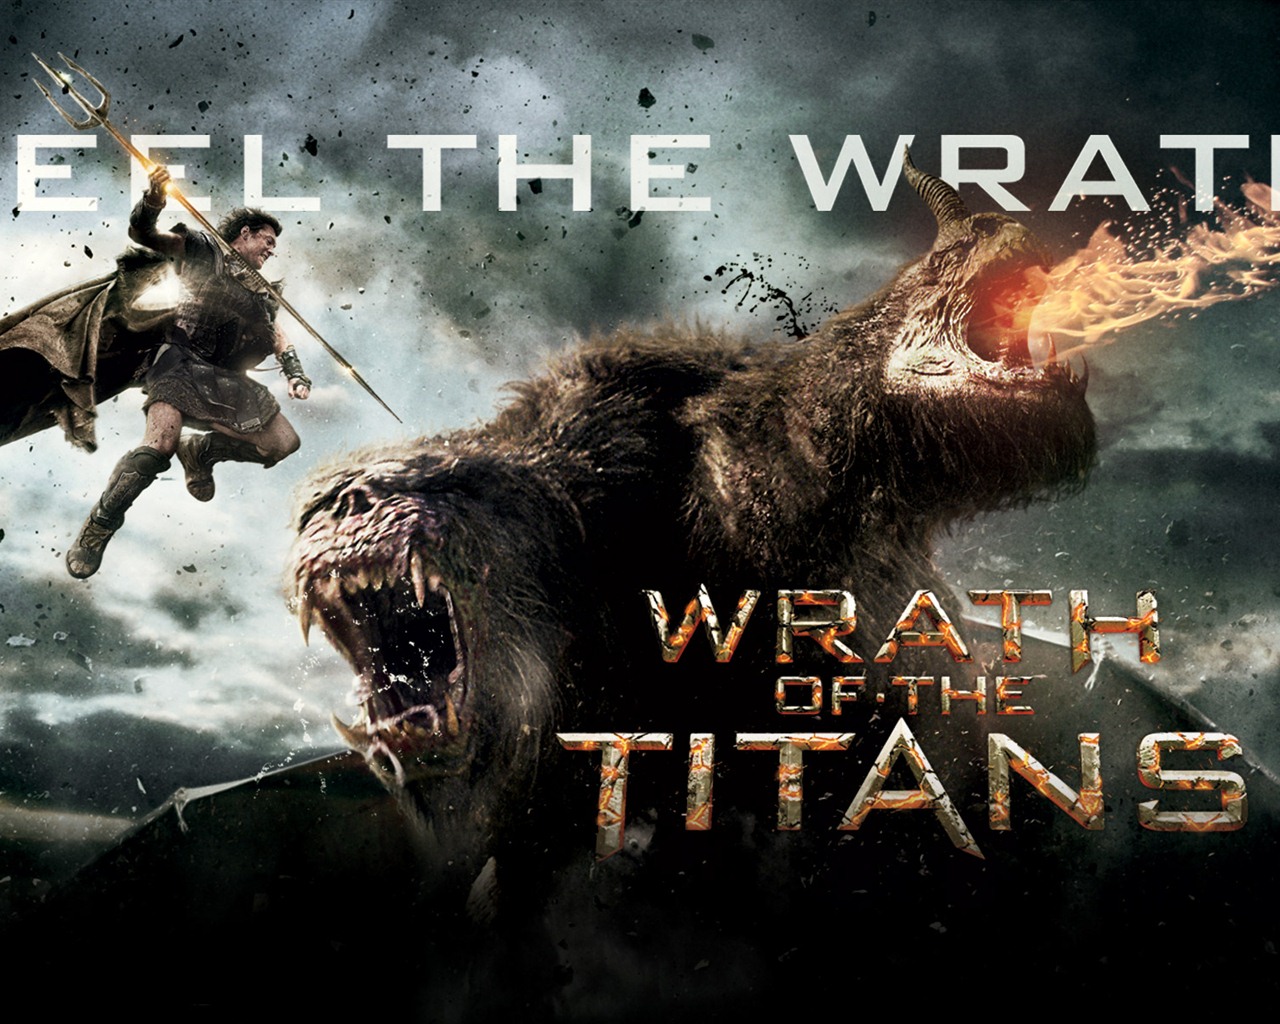 Wrath of the Titans HD Wallpapers #1 - 1280x1024